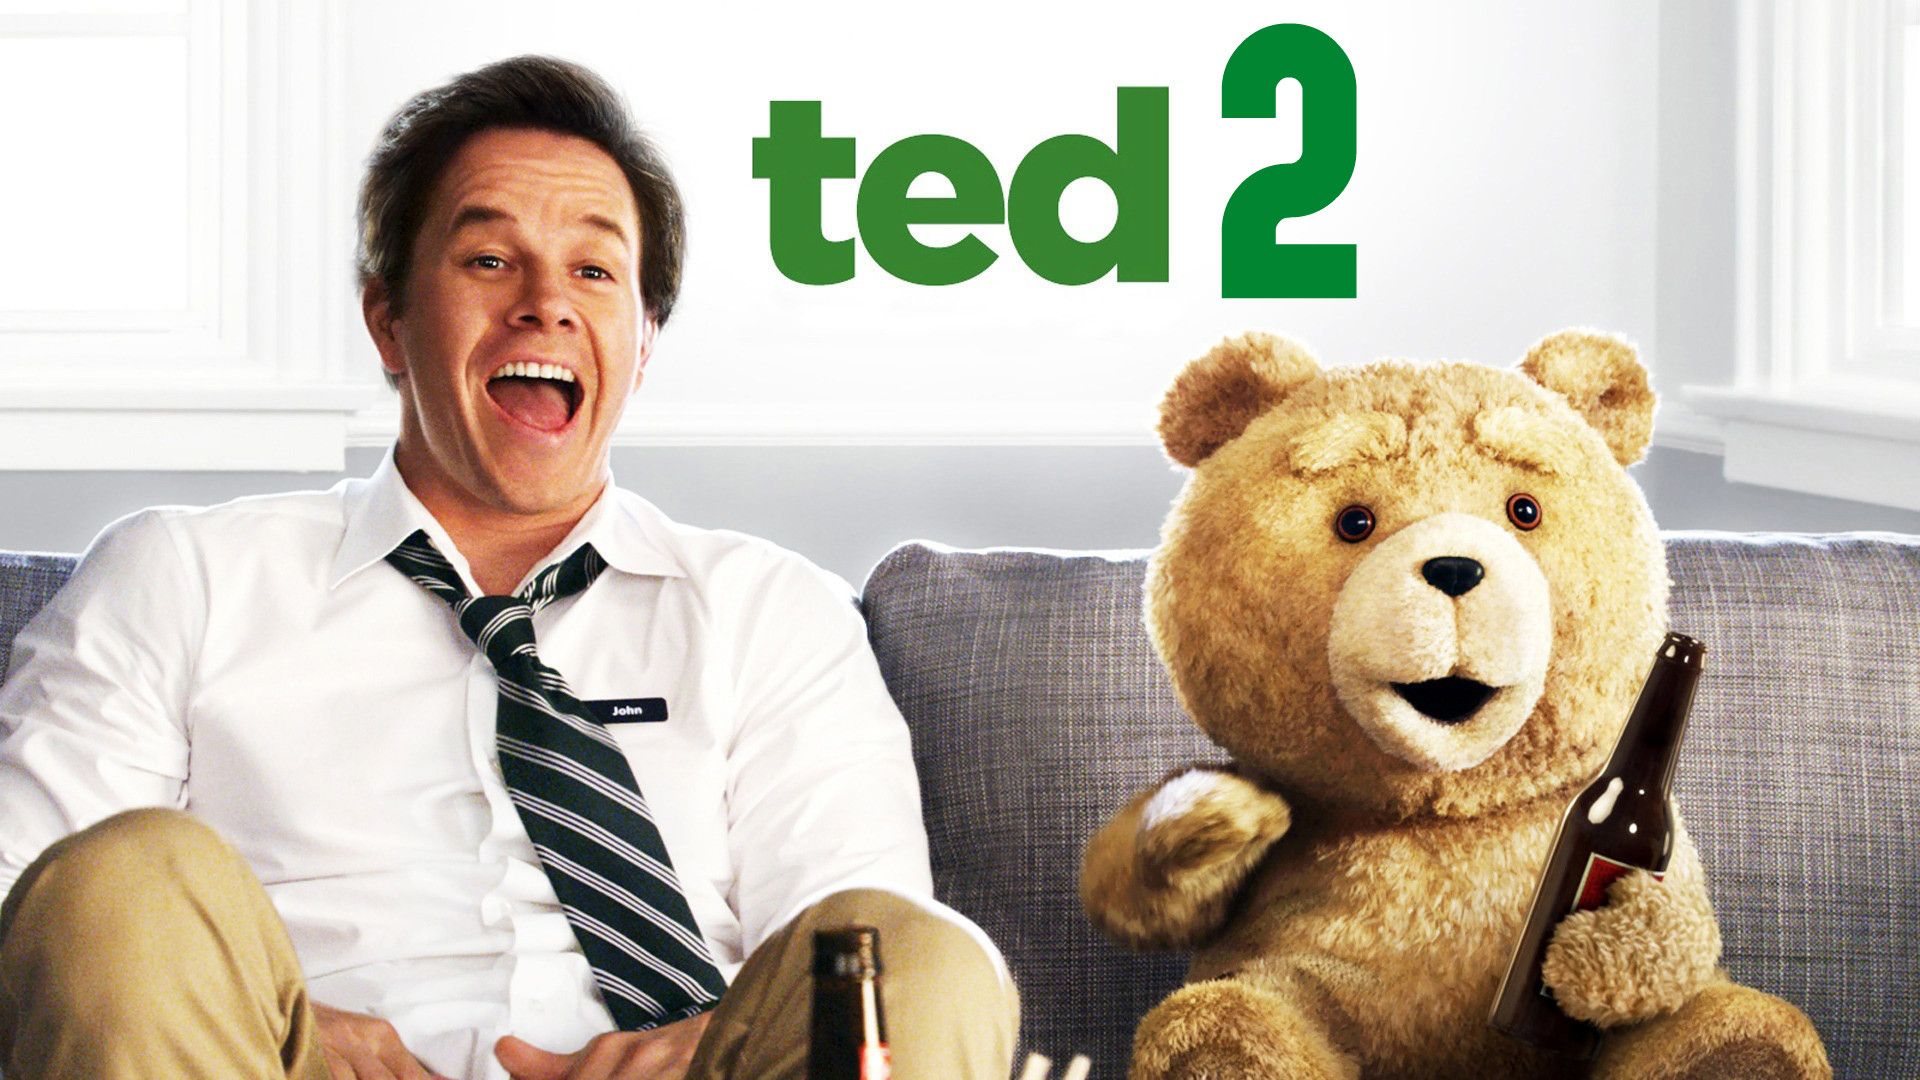 Ted 2 wallpaper, Movie, HQ Ted 2 pictureK Wallpaper 2019